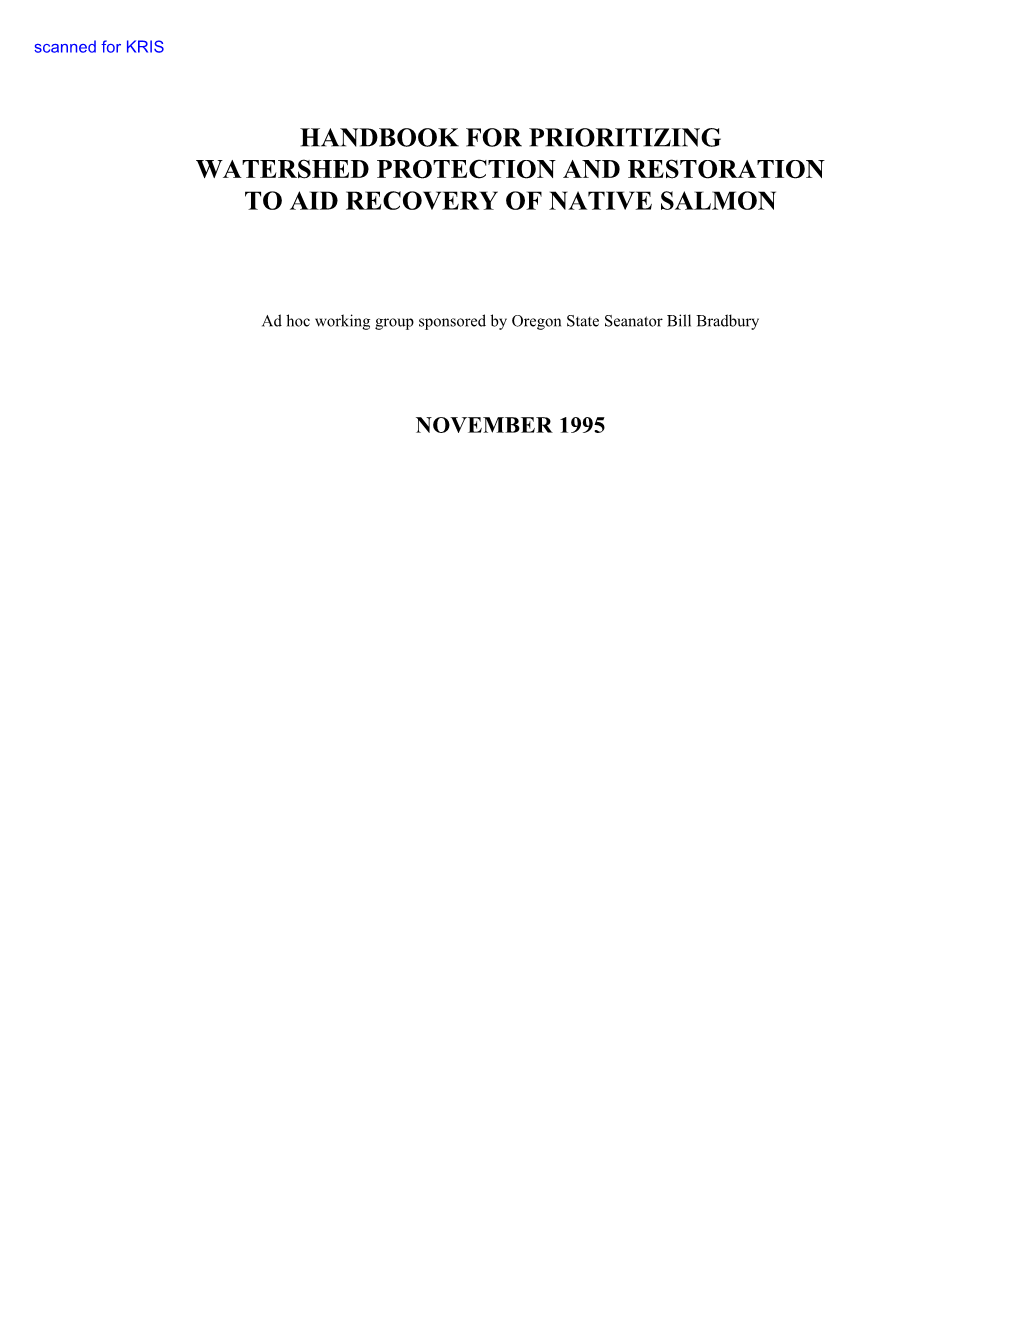 Handbook for Prioritizing Watershed Protection and Restoration to Aid Recovery of Native Salmon